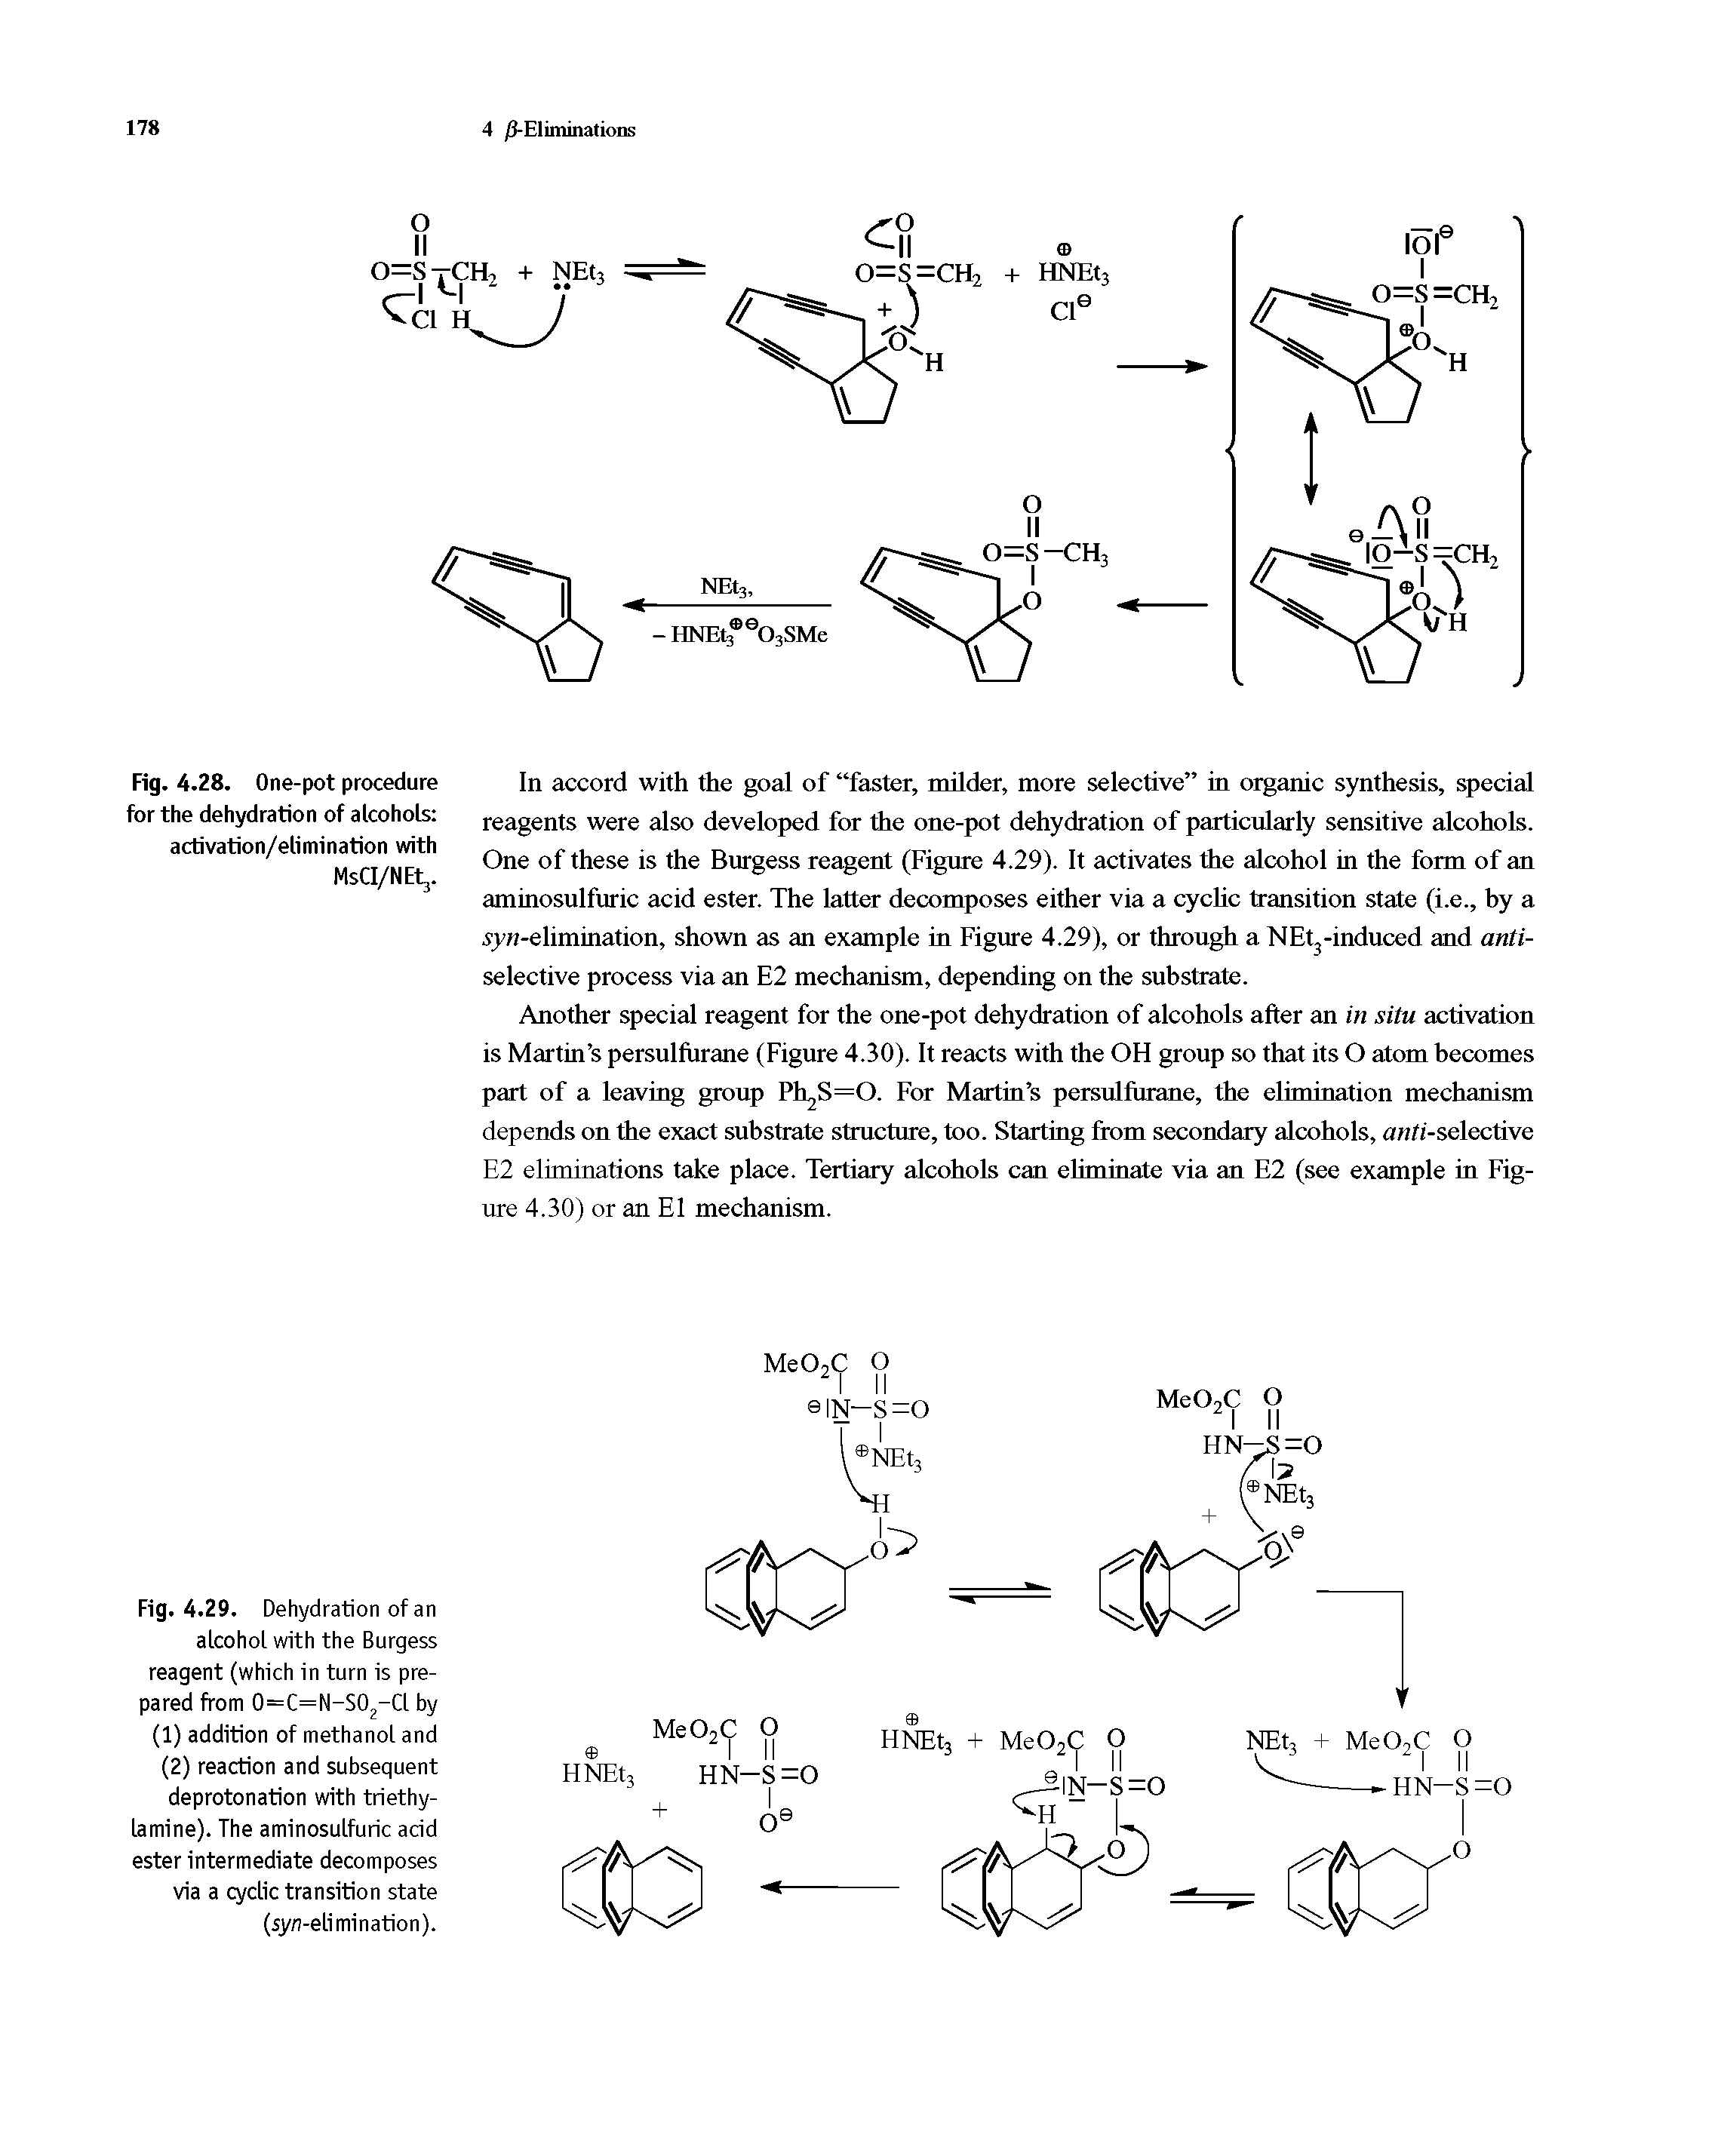 Fig. 4.29. Dehydration of an alcohol with the Burgess reagent (which in turn is prepared from 0=C=N-S02-CI by (1) addition of methanol and (2) reaction and subsequent deprotonation with triethy-lamine). The aminosulfuric acid ester intermediate decomposes via a cyclic transition state (syn-elimination).